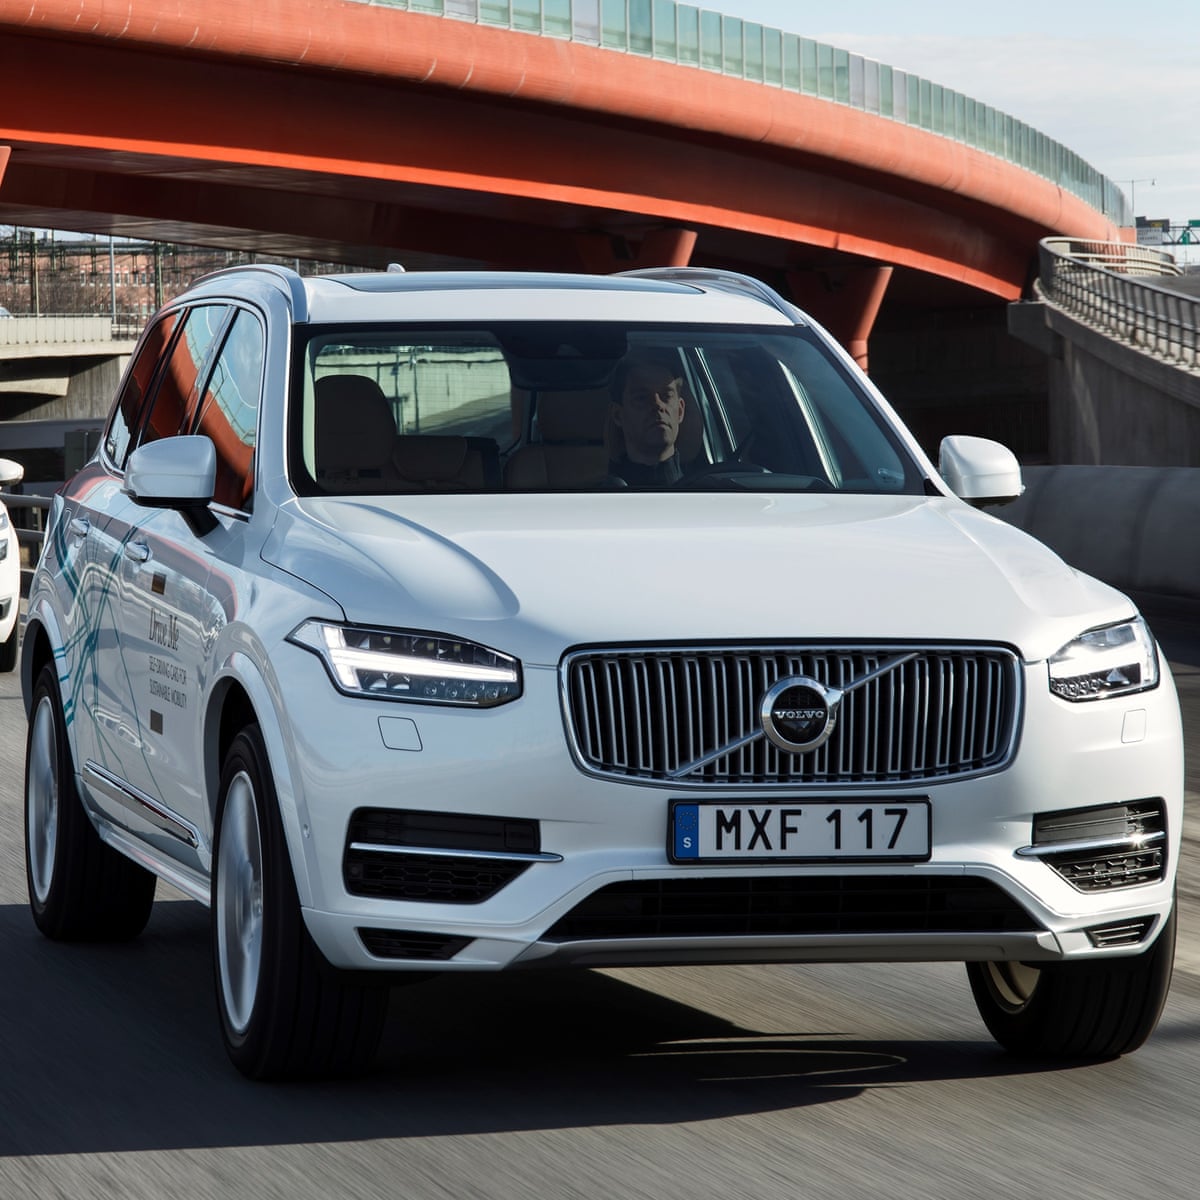 All Volvo cars to be electric or hybrid from 2019, Volvo